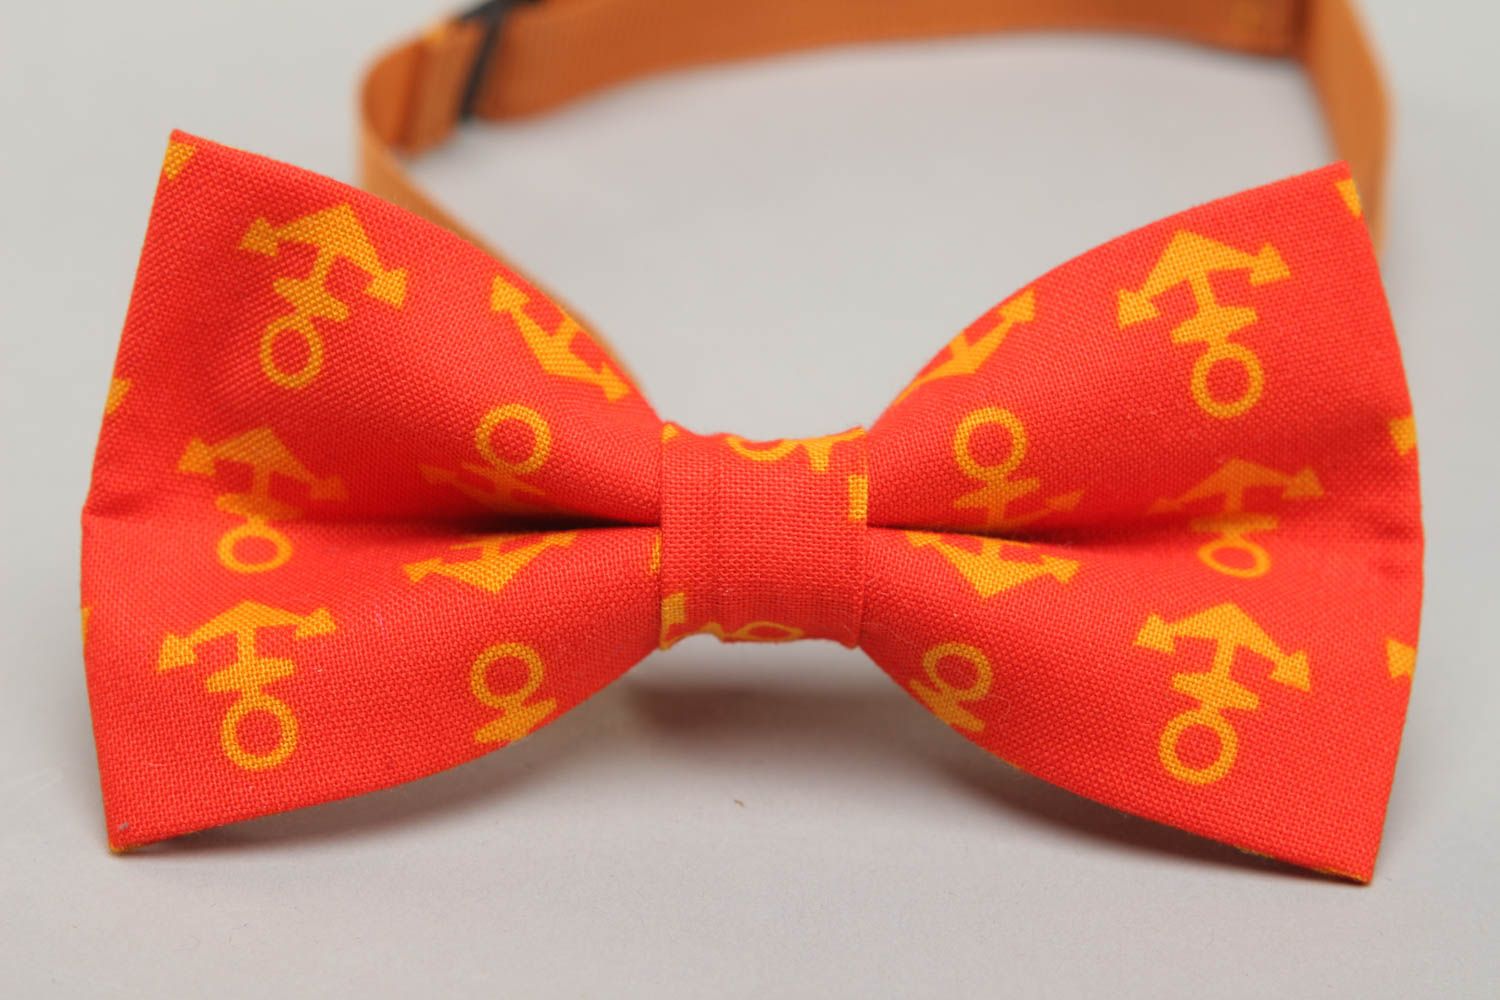 Handmade fabric bow tie with anchors pattern photo 2